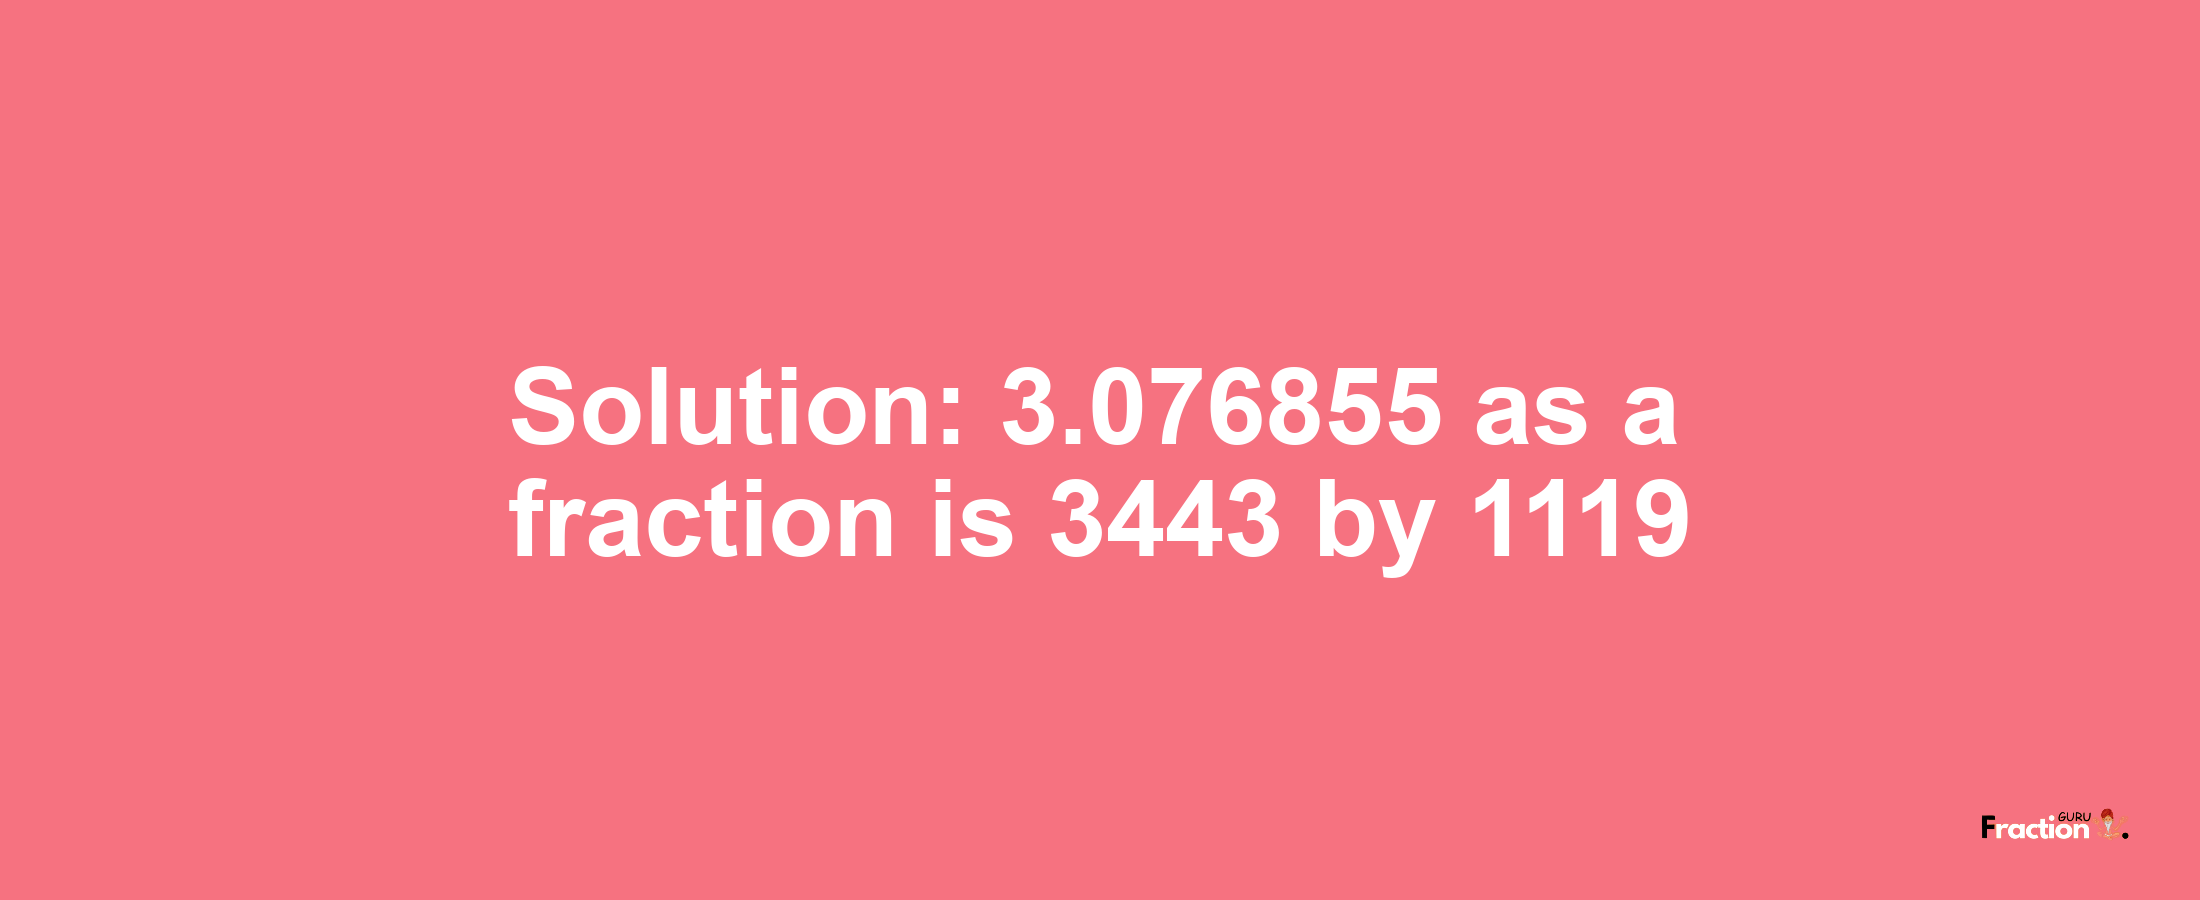 Solution:3.076855 as a fraction is 3443/1119